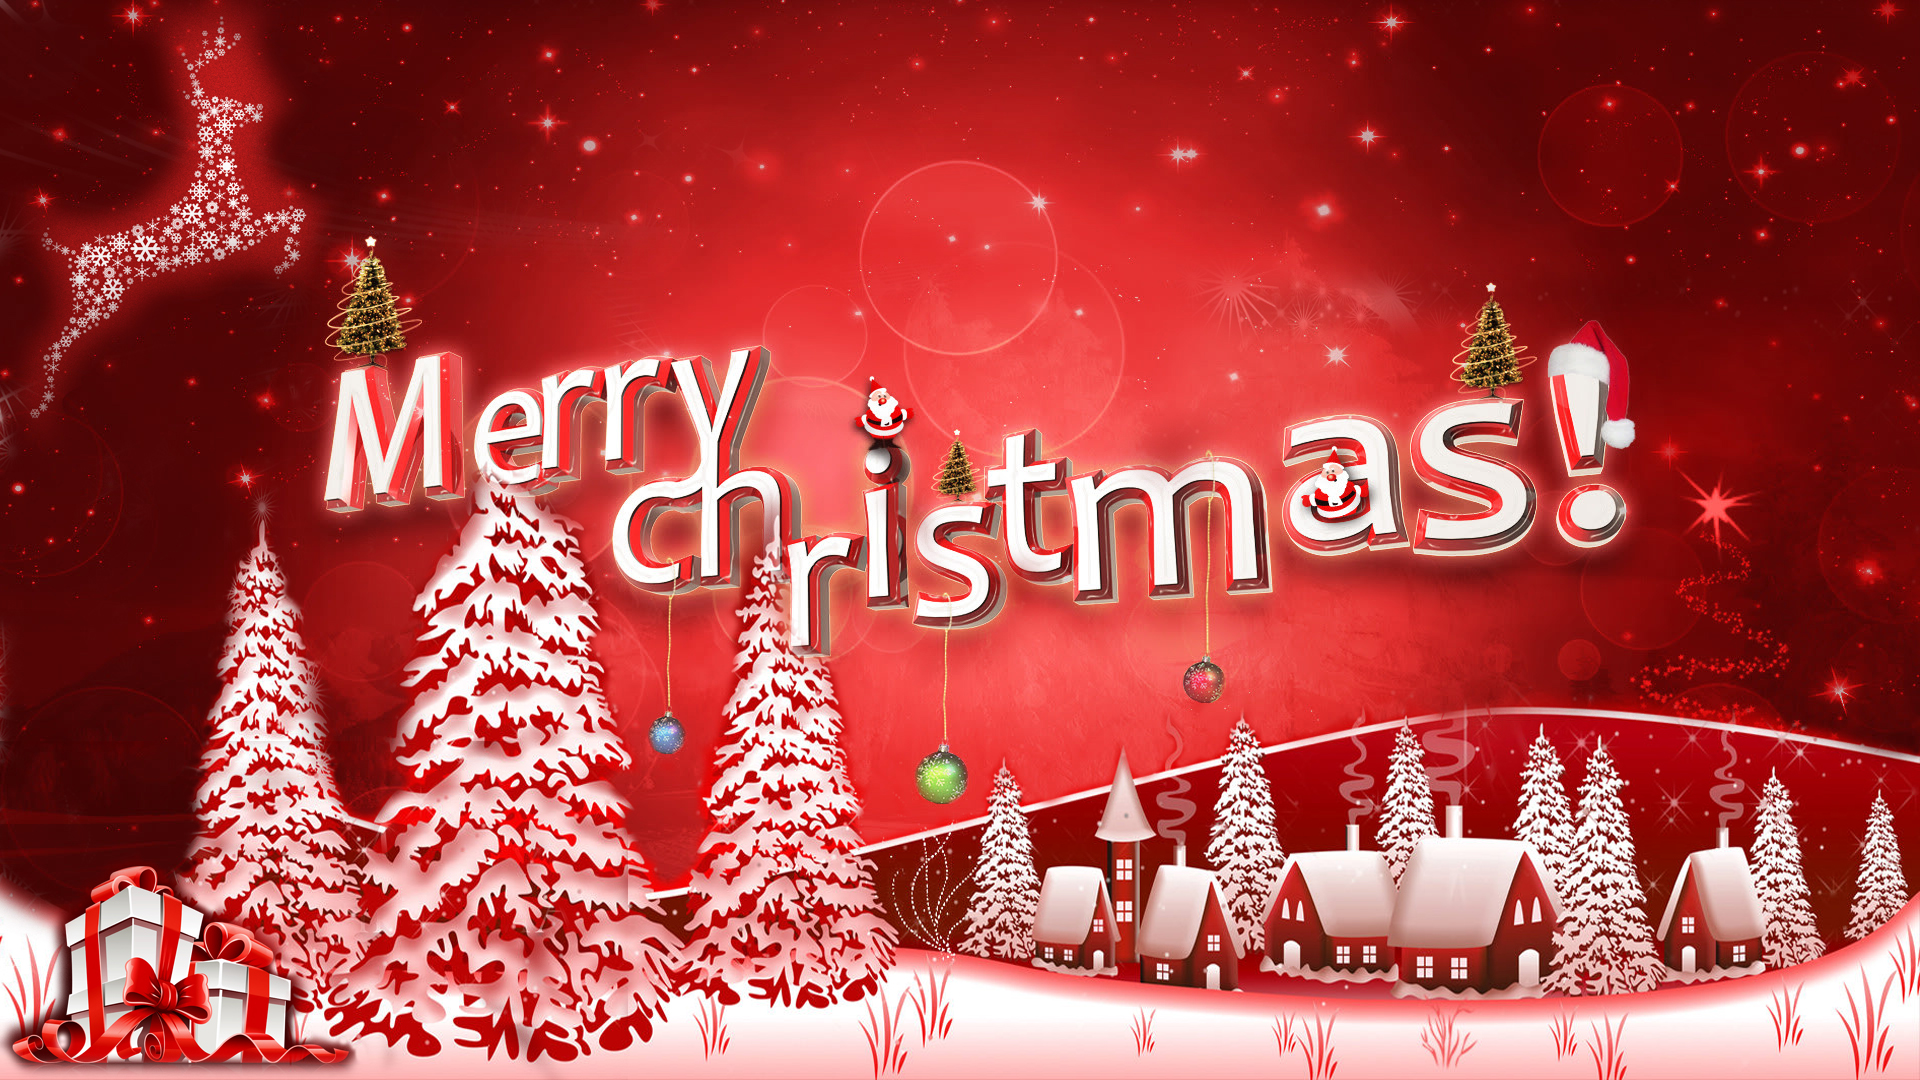 Merry-Christmas-hd-Wallpapers-Images-Free-Download.jpg